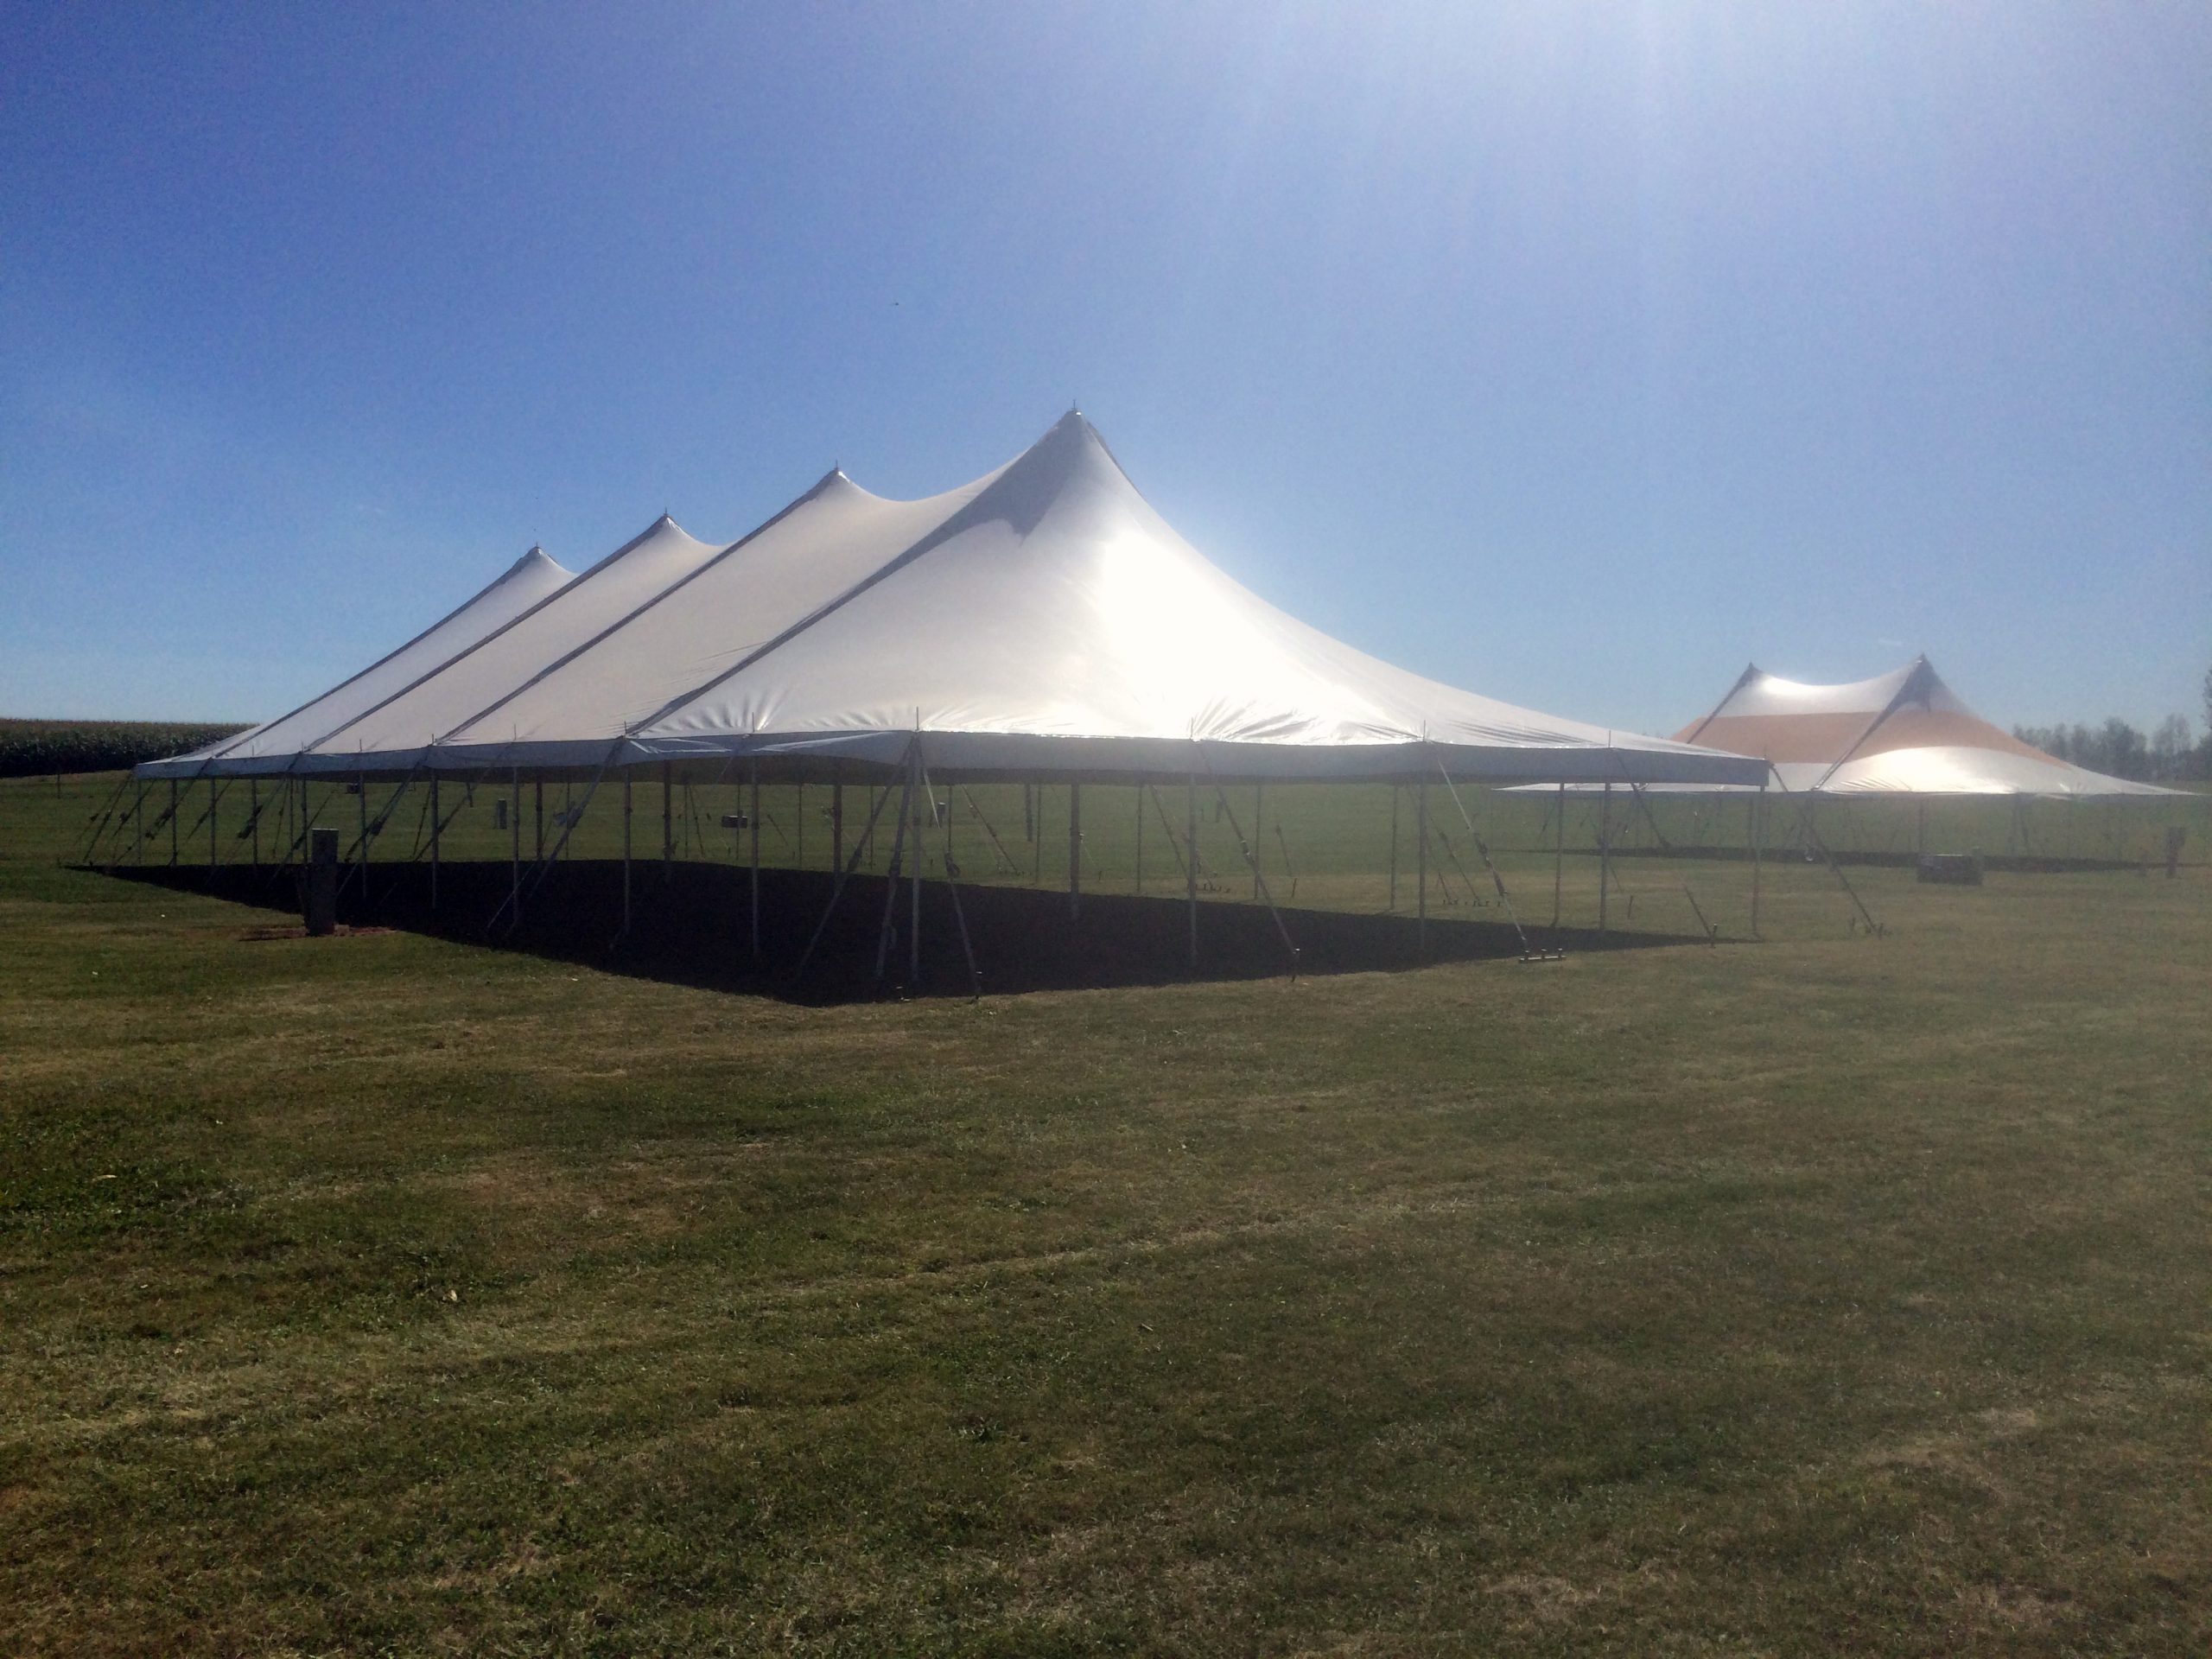 40′ x 100′ and 20′ x 40′ rope and pole tents in Amana Colonies